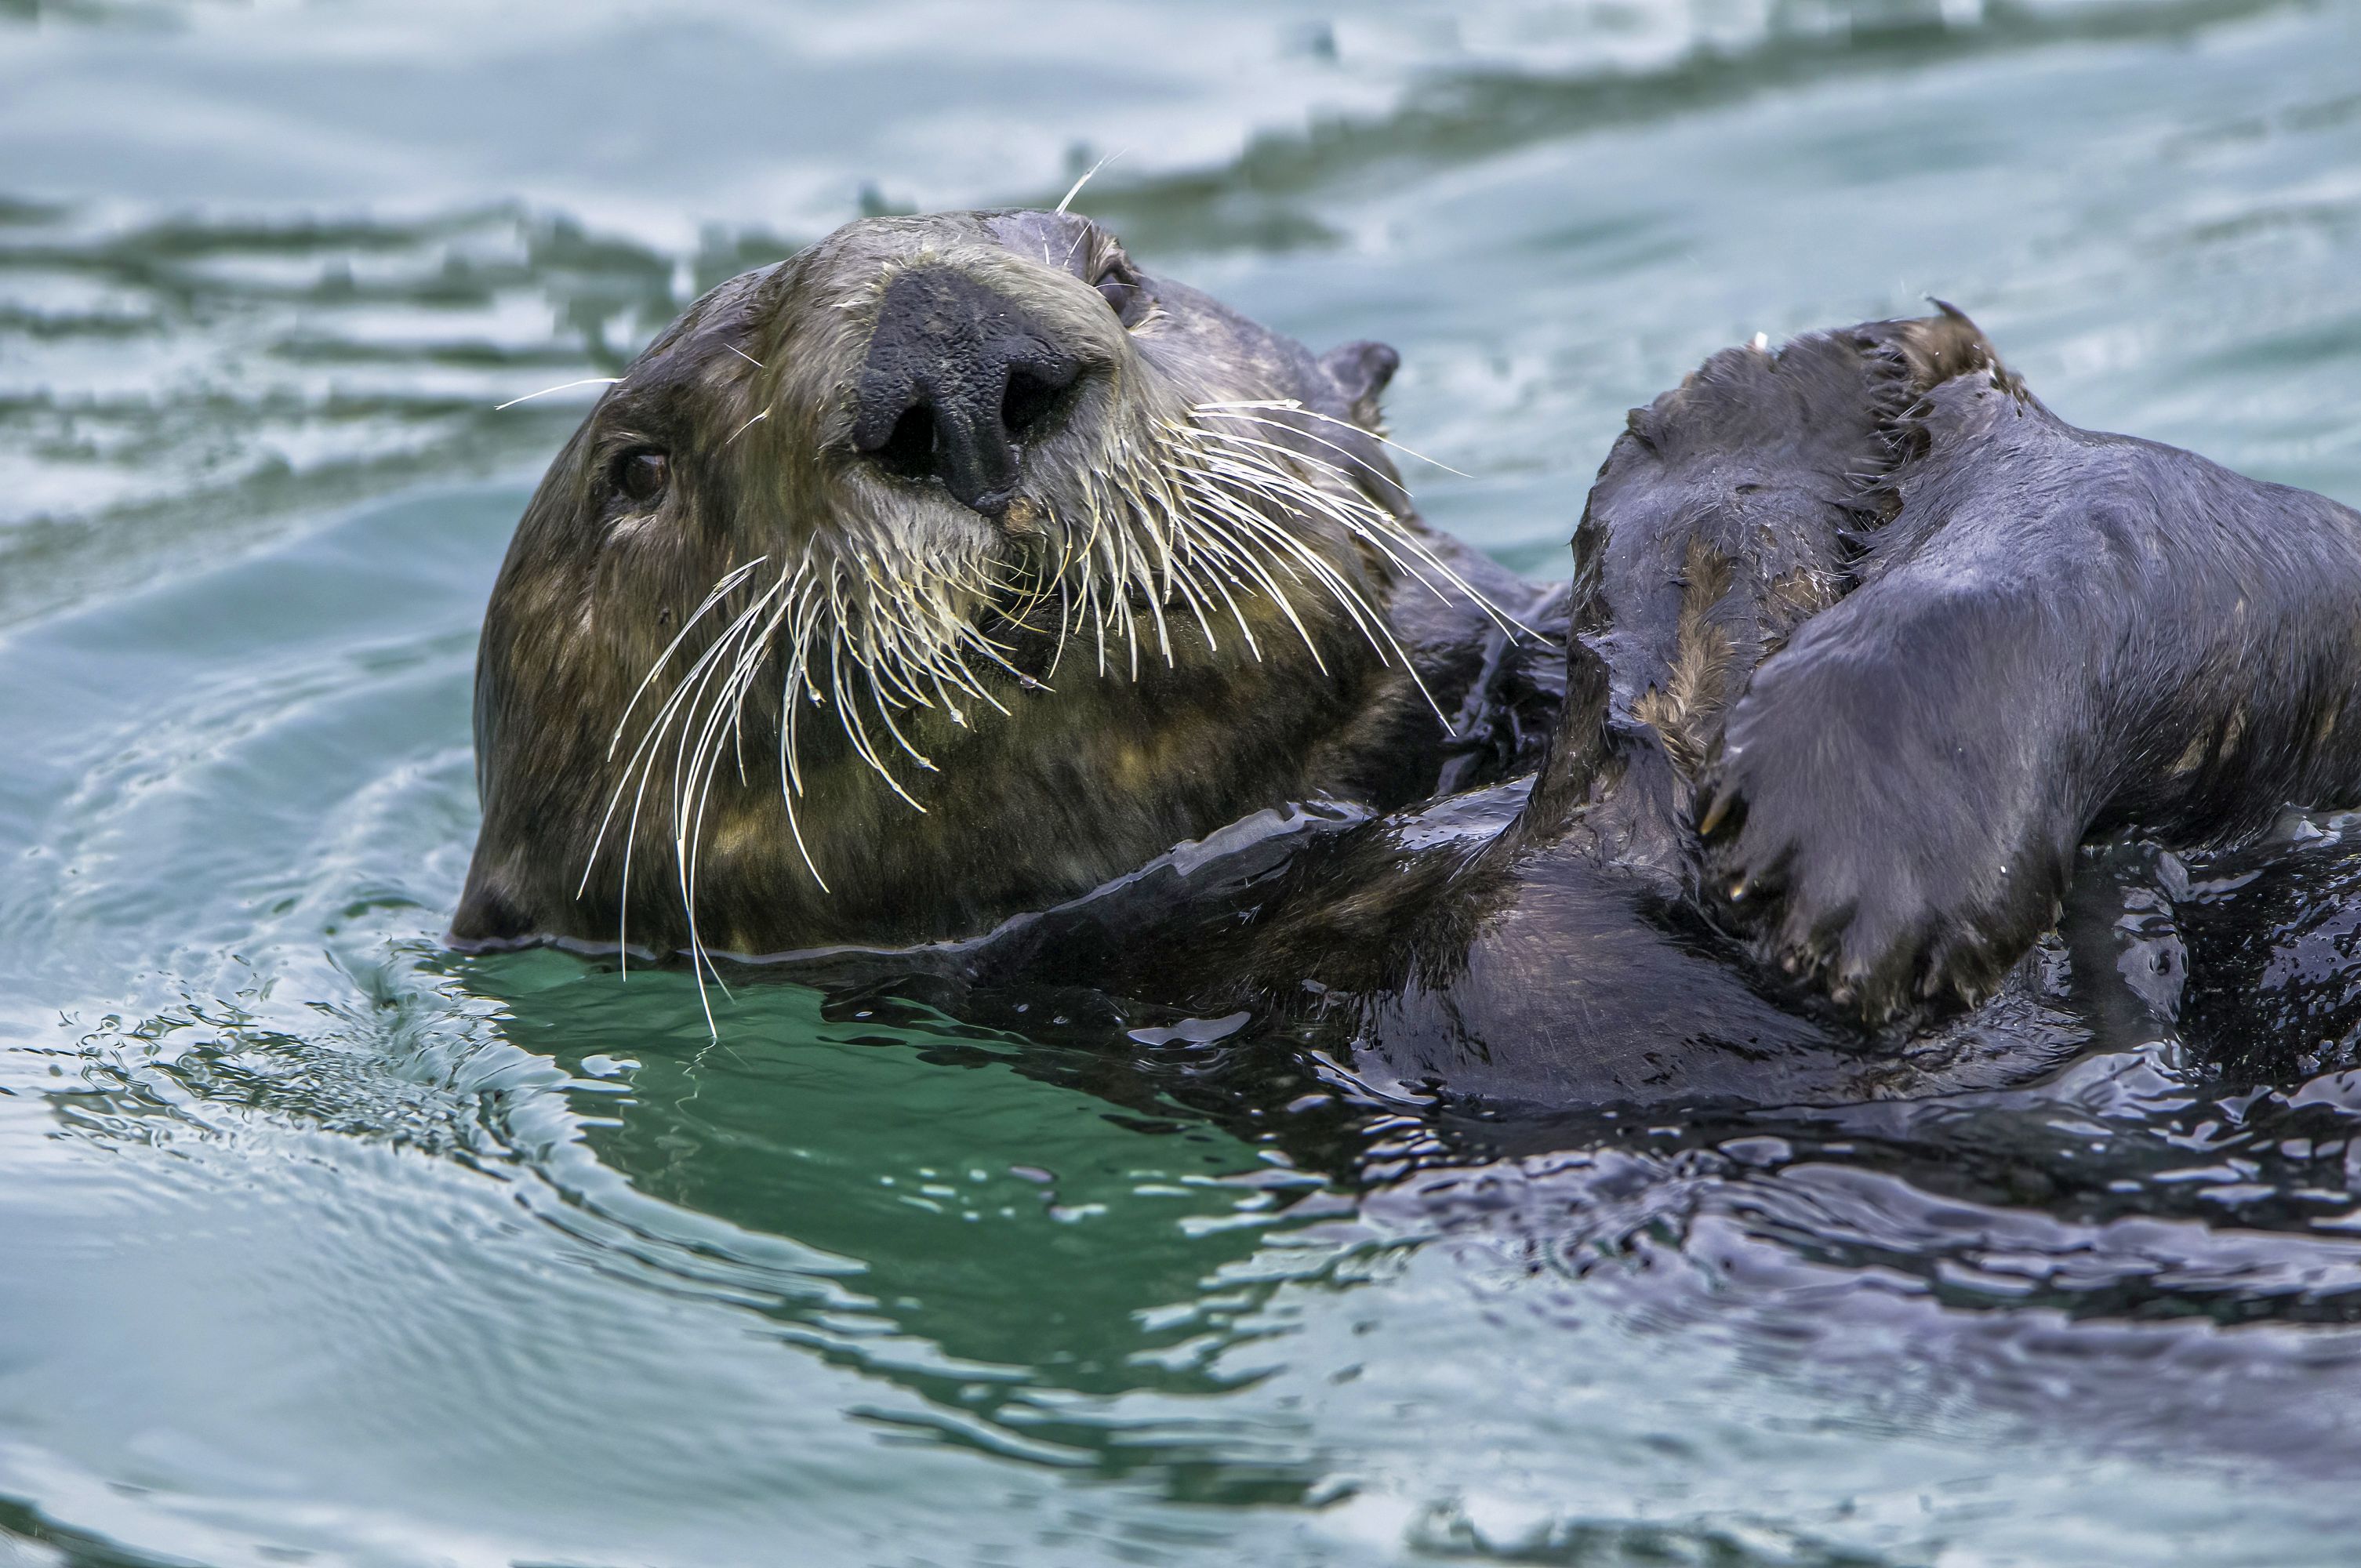 The genome of the endangered sea otter has now been fully decoded.